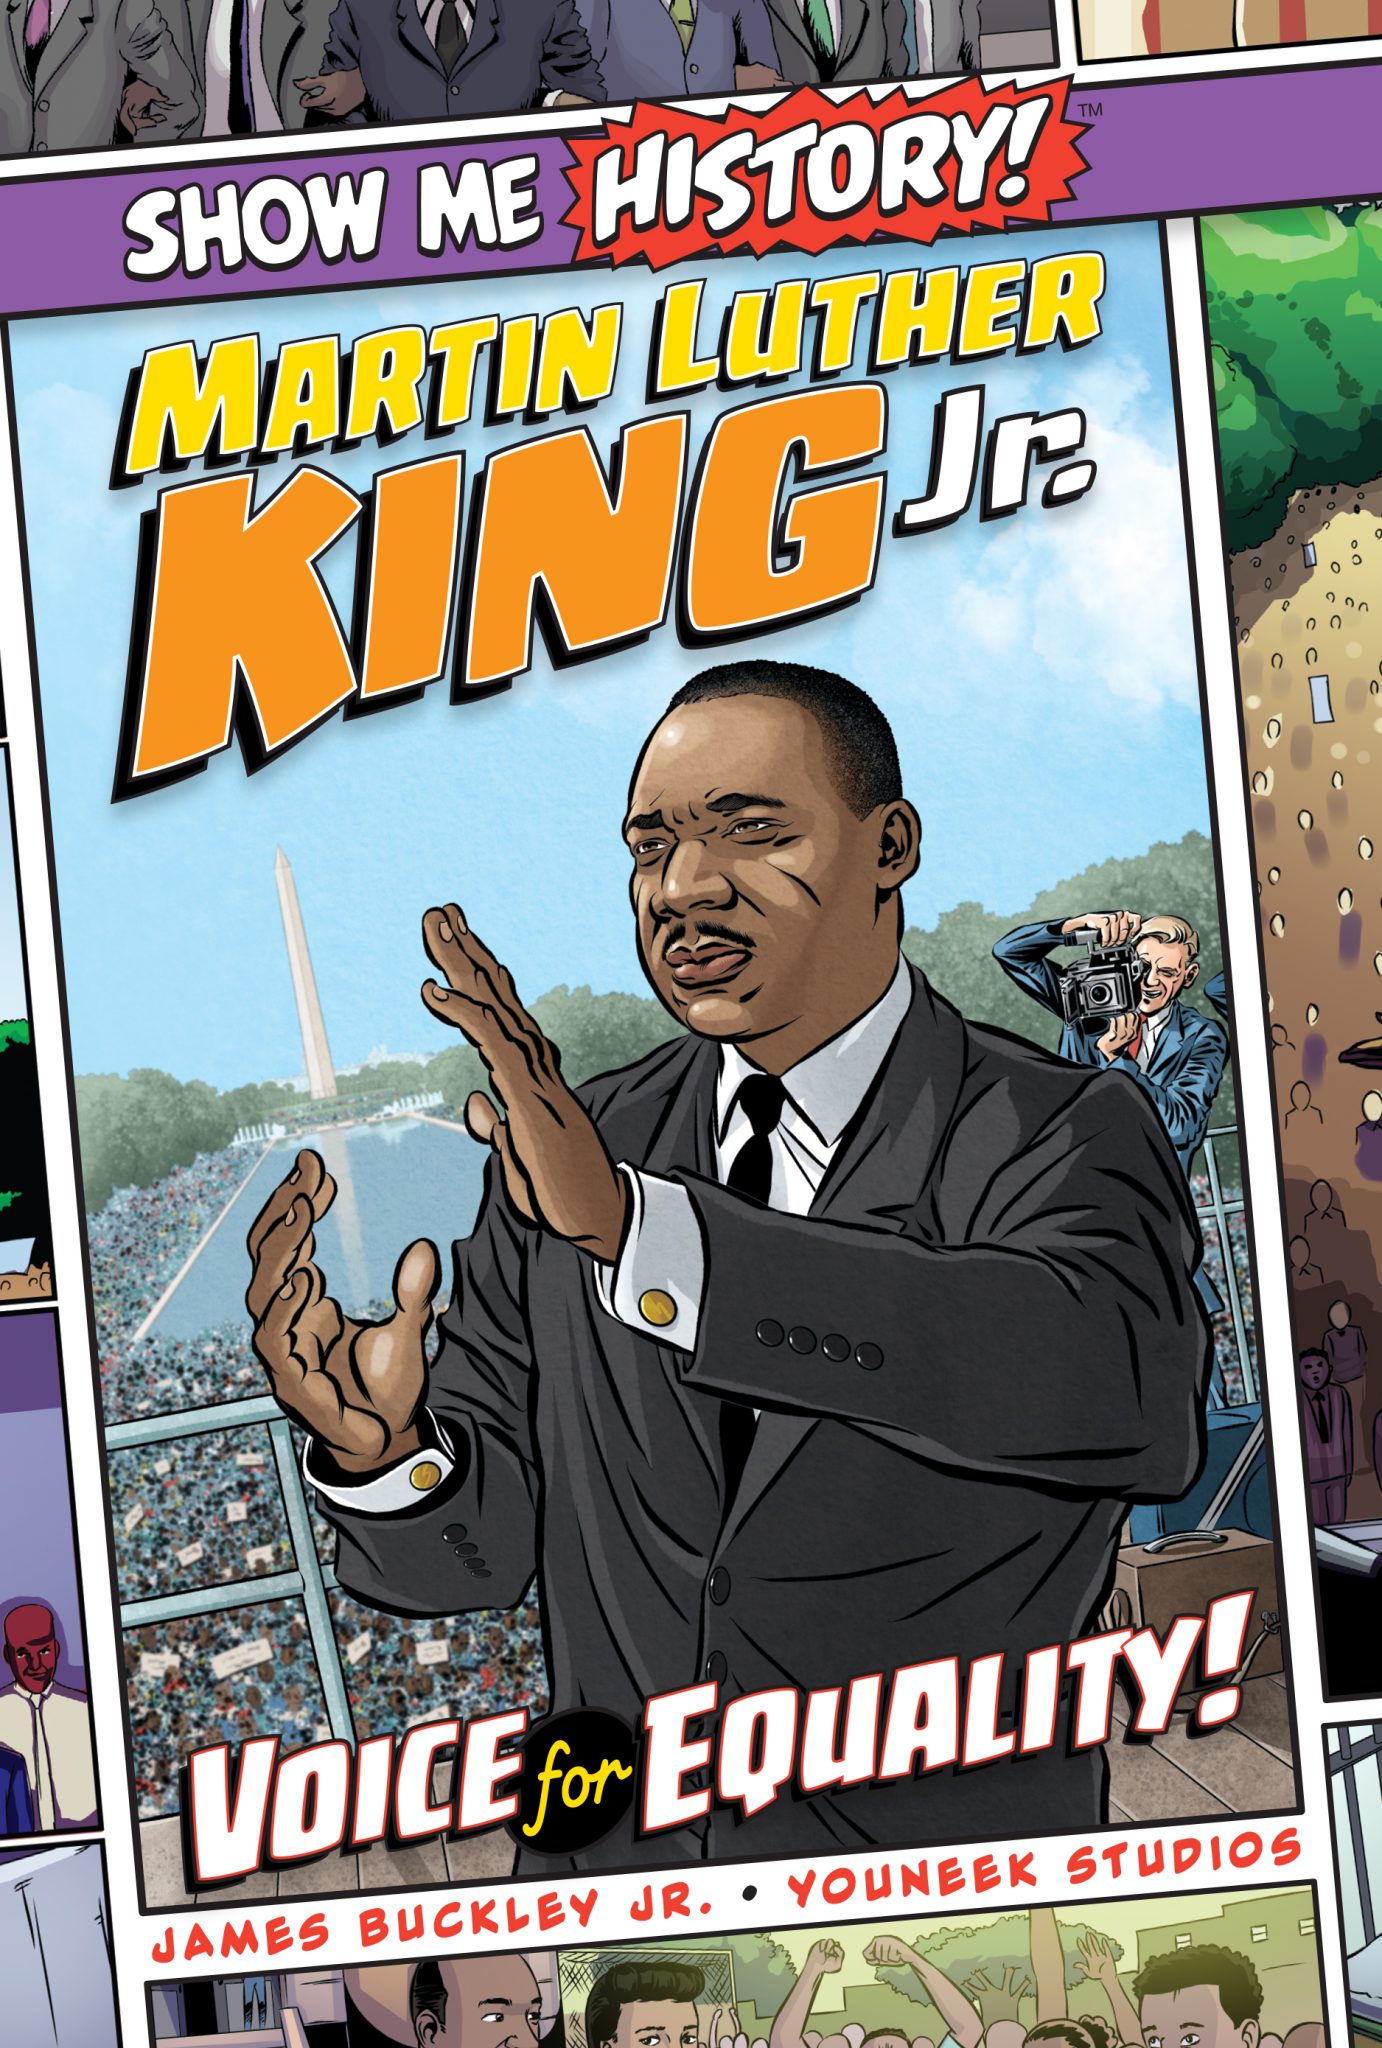 Show Me History Martin Luther King Jr.